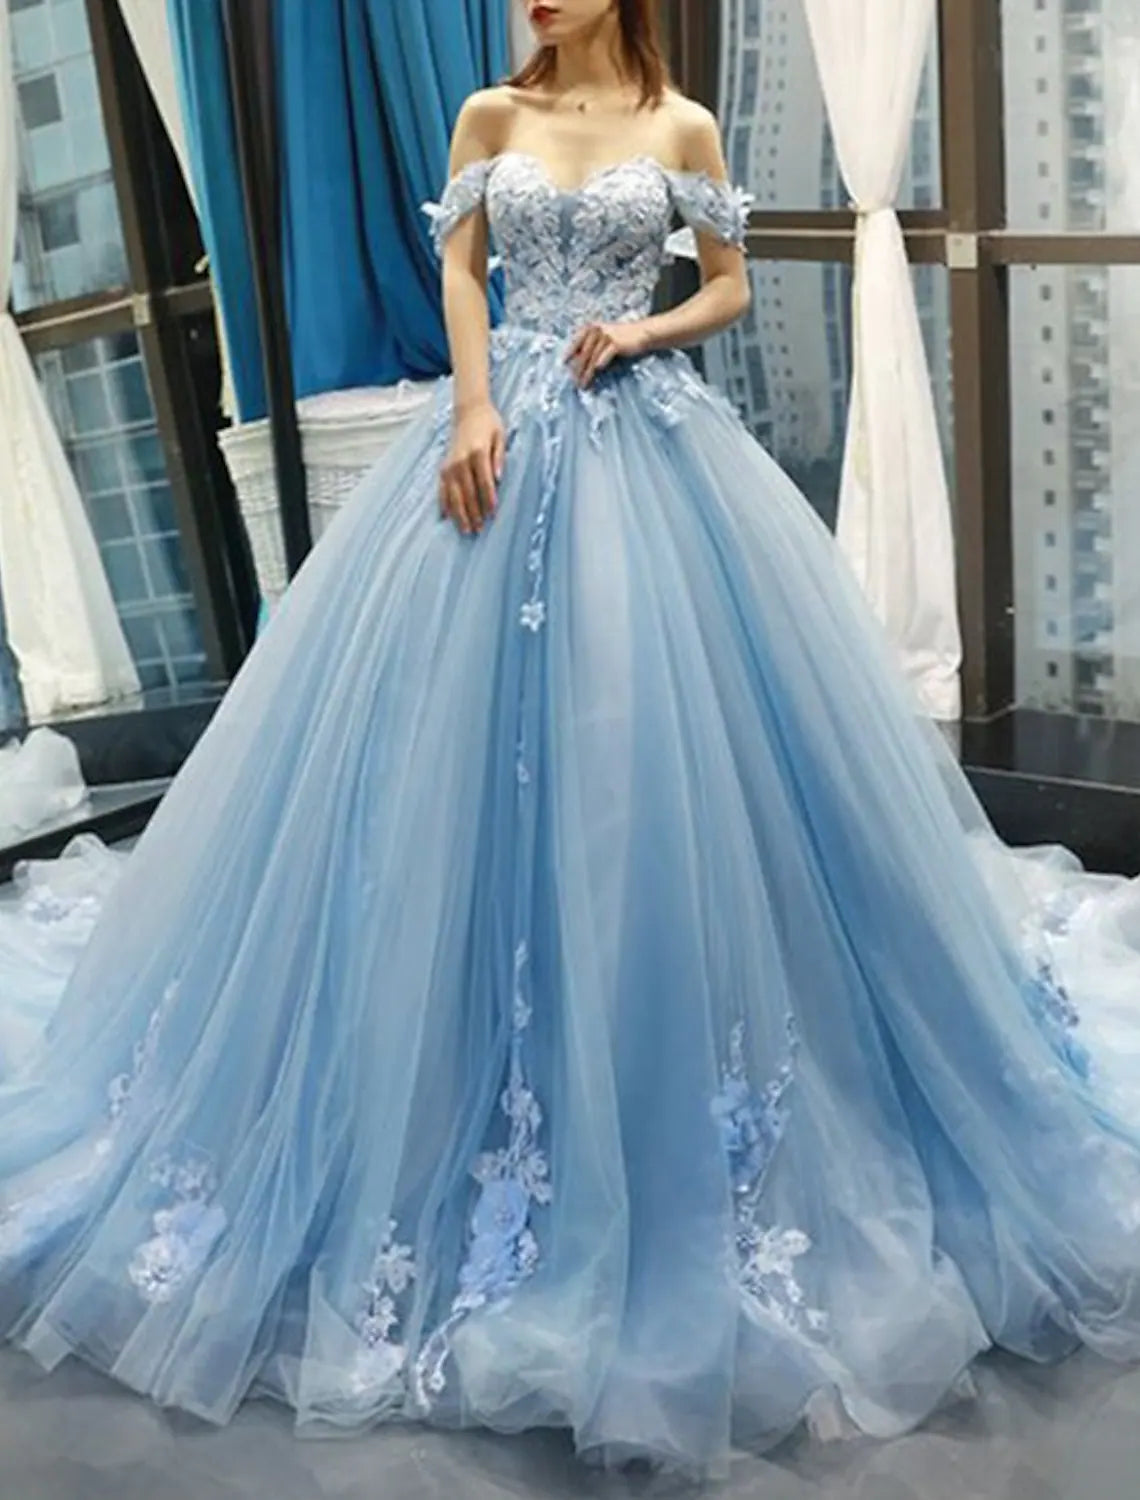 Ball Gown Prom Dresses Floral Dress Quinceanera Court Train Short Sleeve Sweetheart Lace with Pleats Appliques